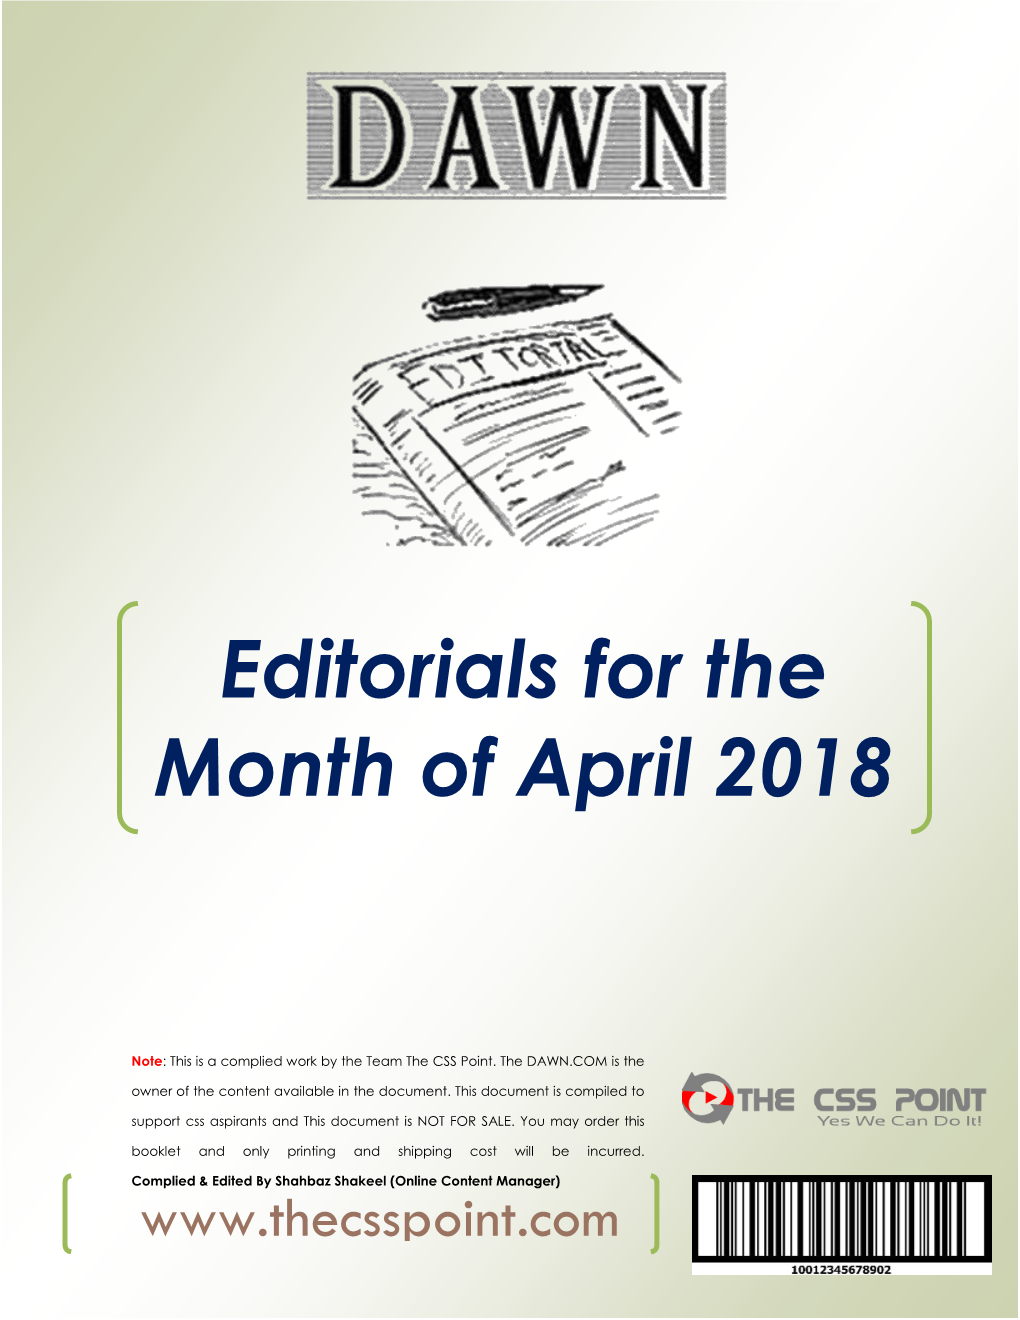 Editorials for the Month of April 2018